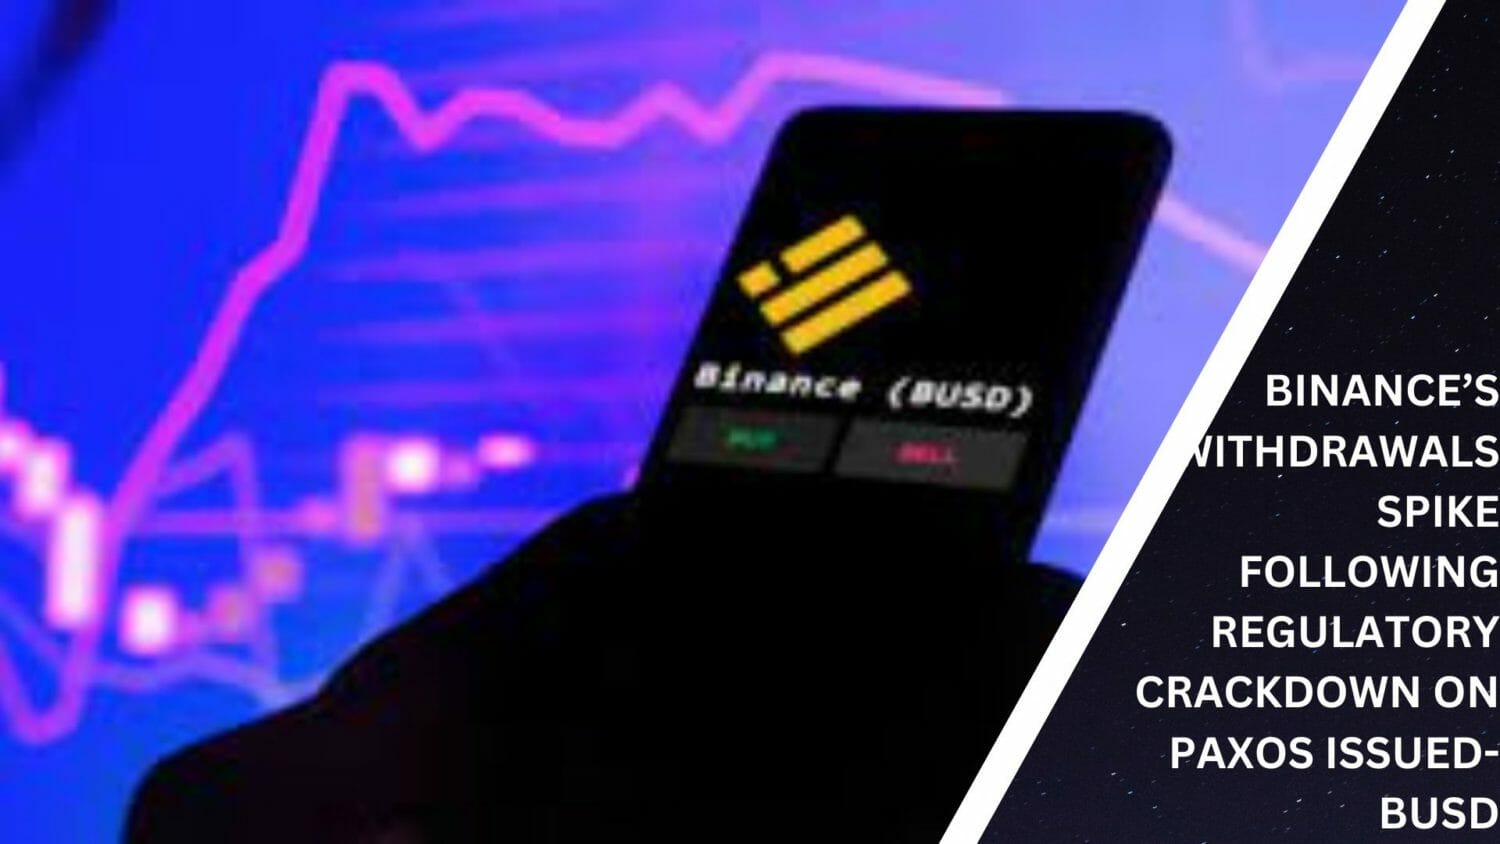 Binance’s Withdrawals Spike Following Regulatory Crackdown On Paxos Issued-Busd